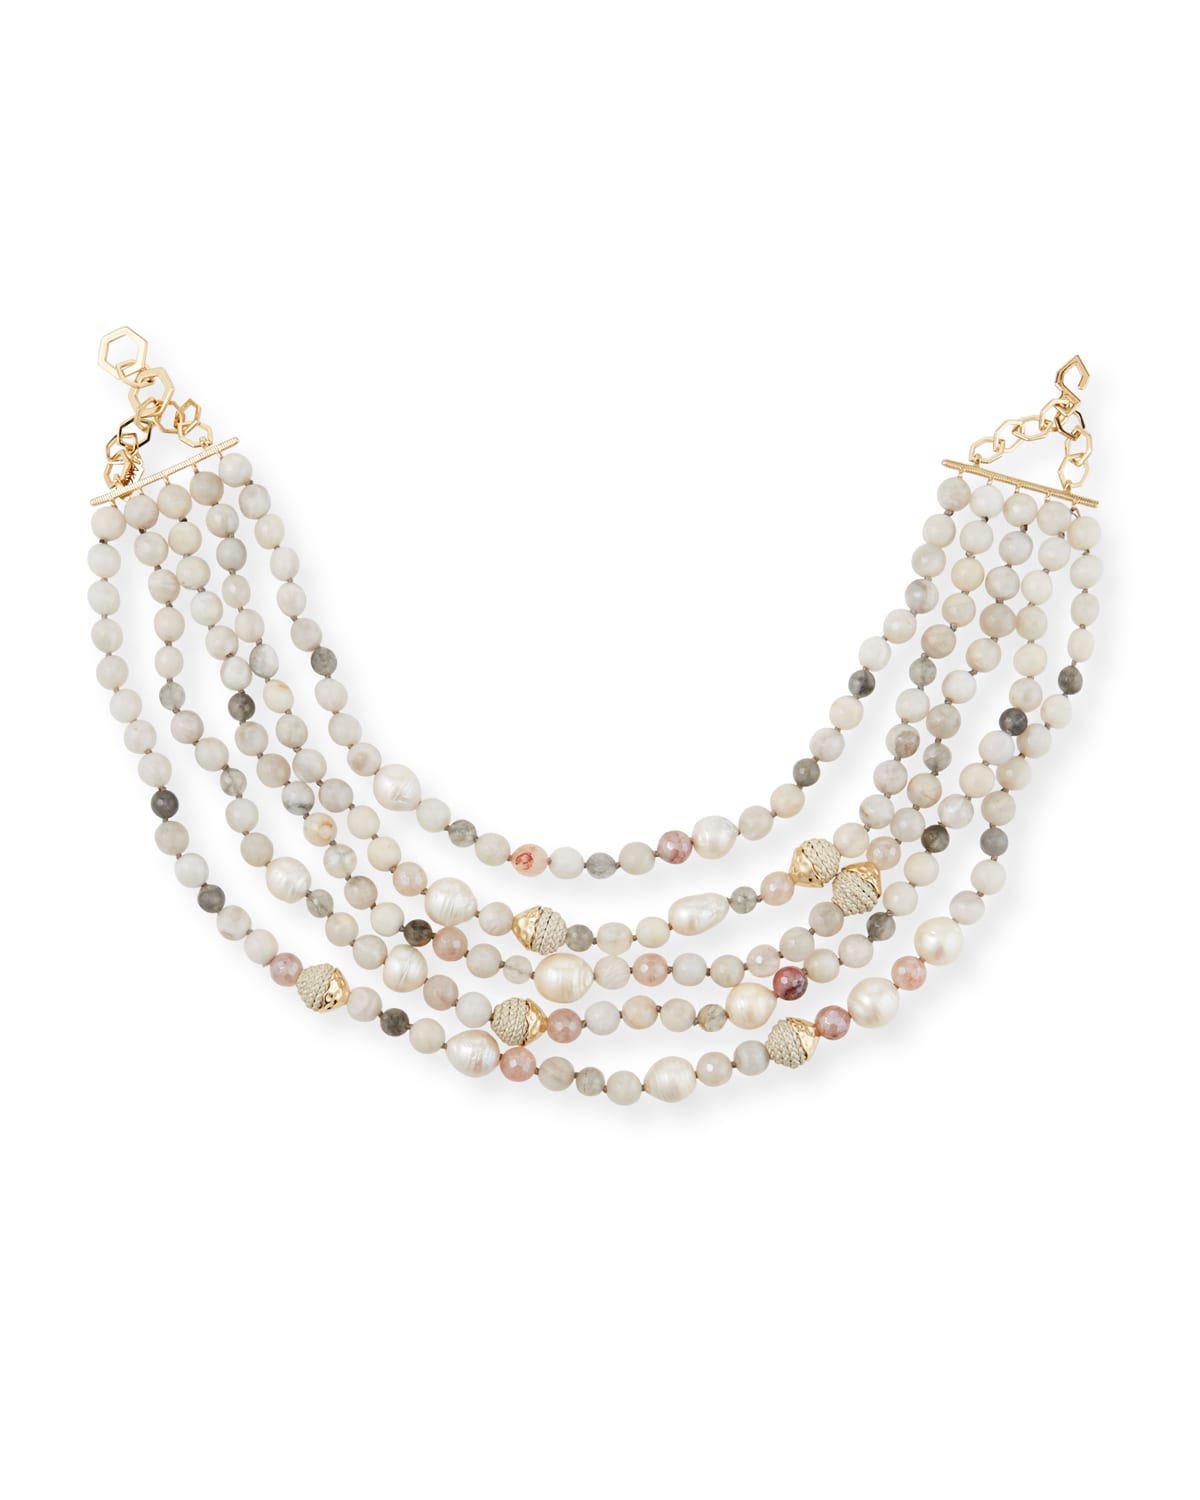 5-Strand Beaded Necklace